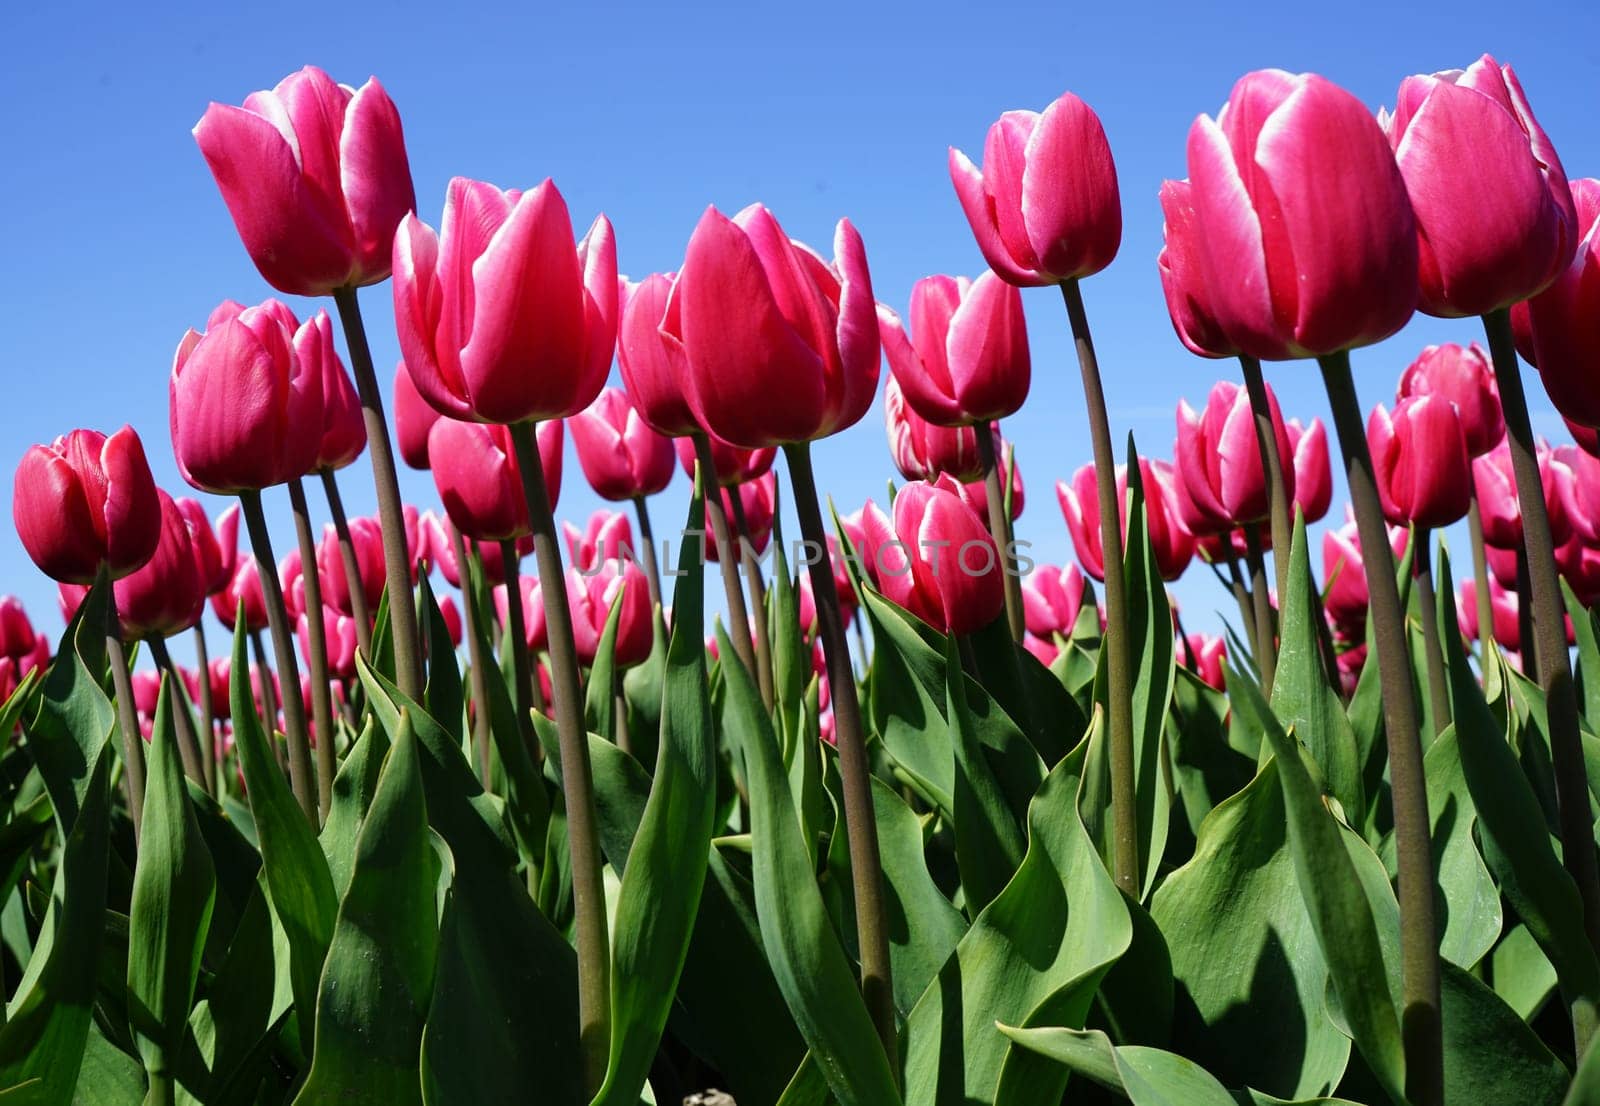 Pink tulips with a white rim in a tulip field against a blue sky